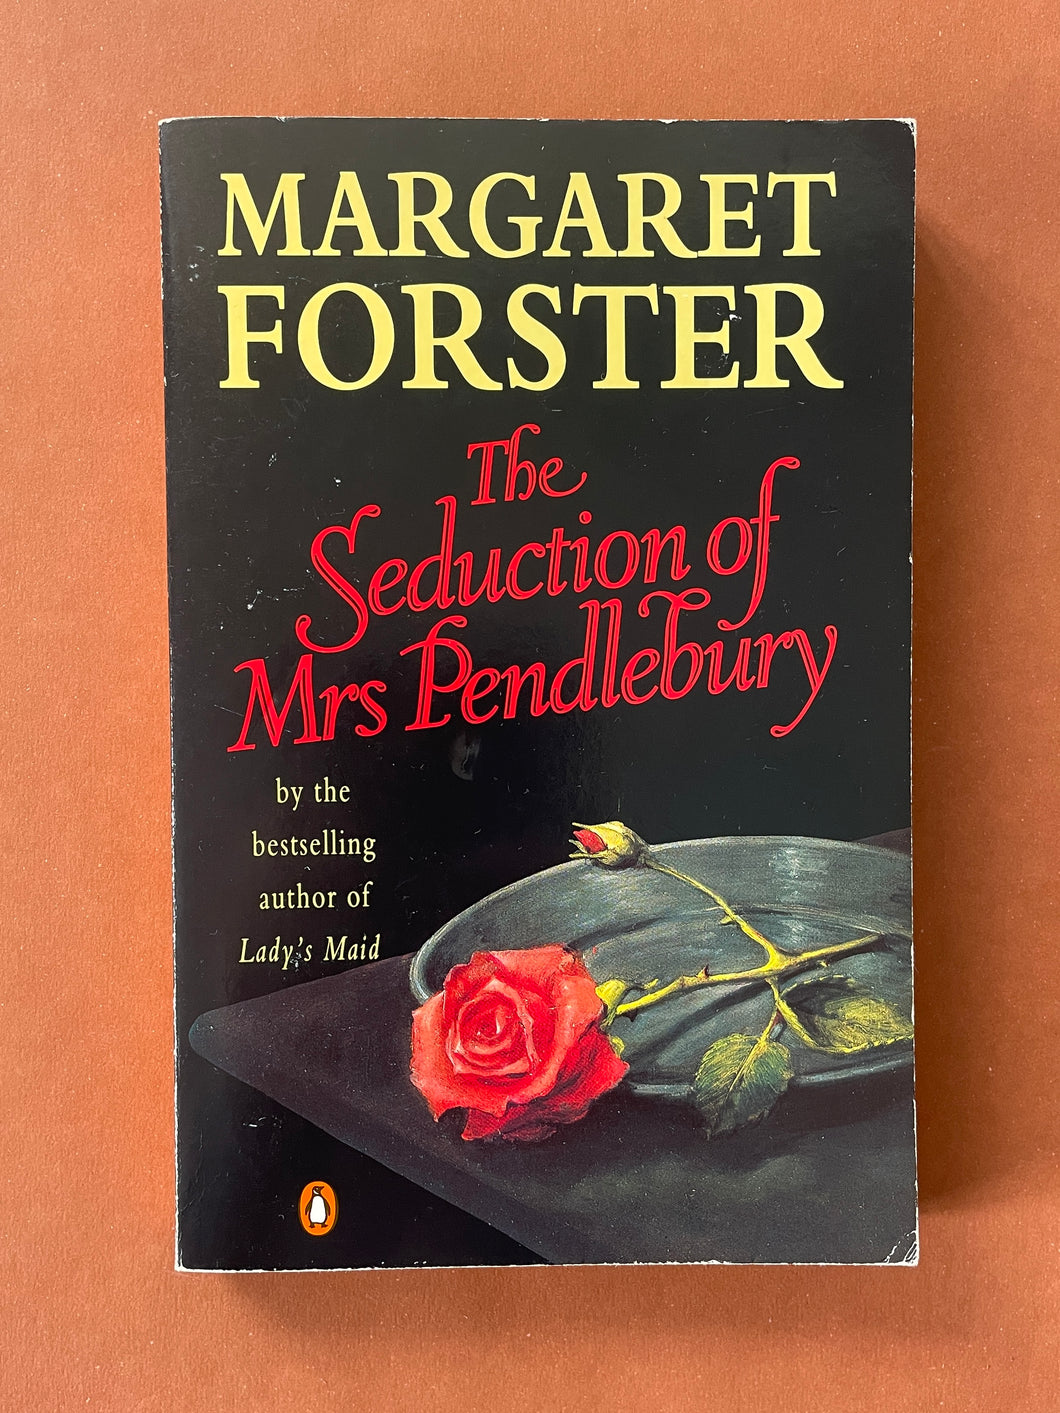 The Seduction of Mrs Pendlebury by Margaret Forster: photo of the front cover which shows minor, but obvious, scuff marks.